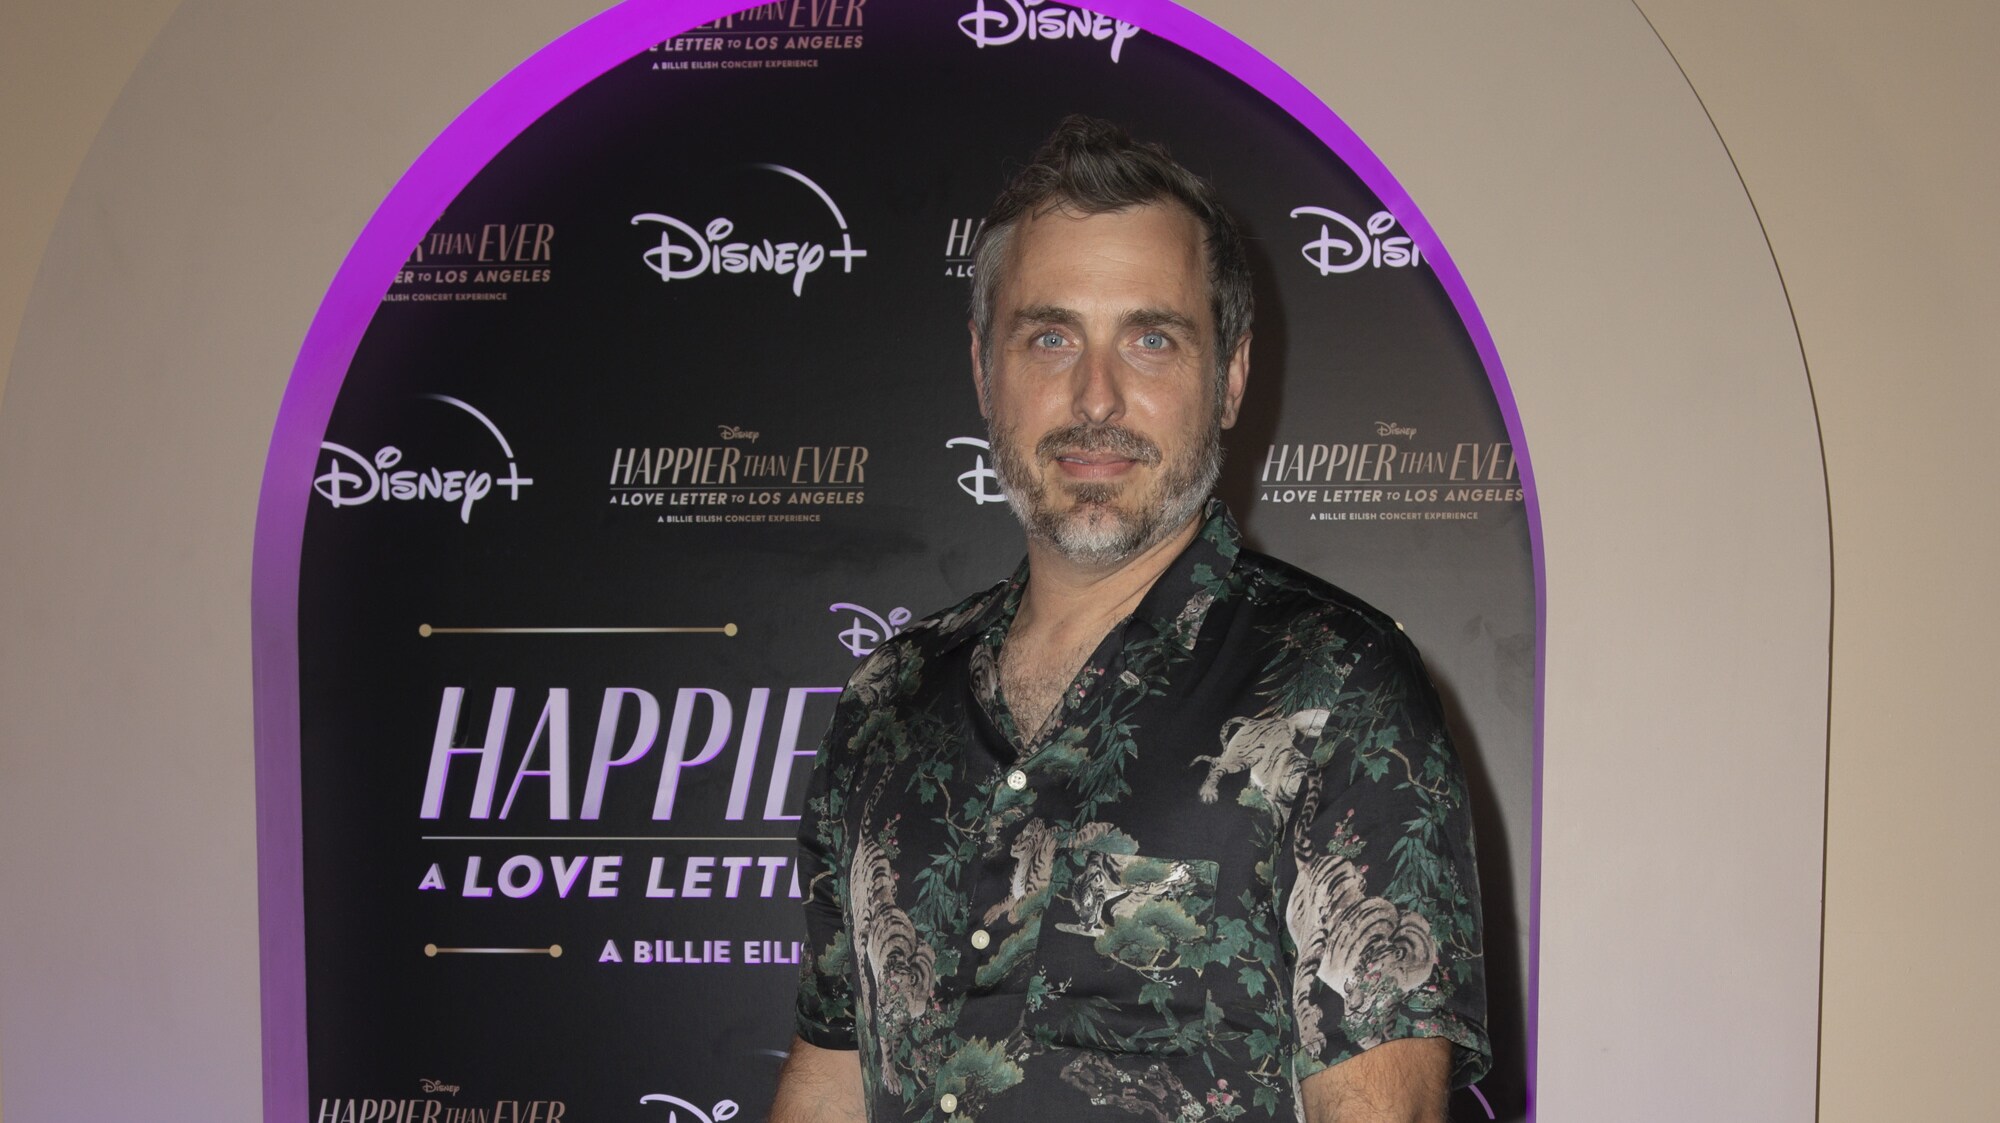 HAPPIER THAN EVER: A LOVE LETTER TO LOS ANGELES - Stars celebrated at the drive-in world premiere of the Disney+ original film, “Happier Than Ever: A Love Letter to Los Angeles,” a Billie Eilish concert experience, at The Grove in Los Angeles, Calif., Monday, August 30, 2021. (Disney/Kyusung Gong) PATRICK OSBORNE